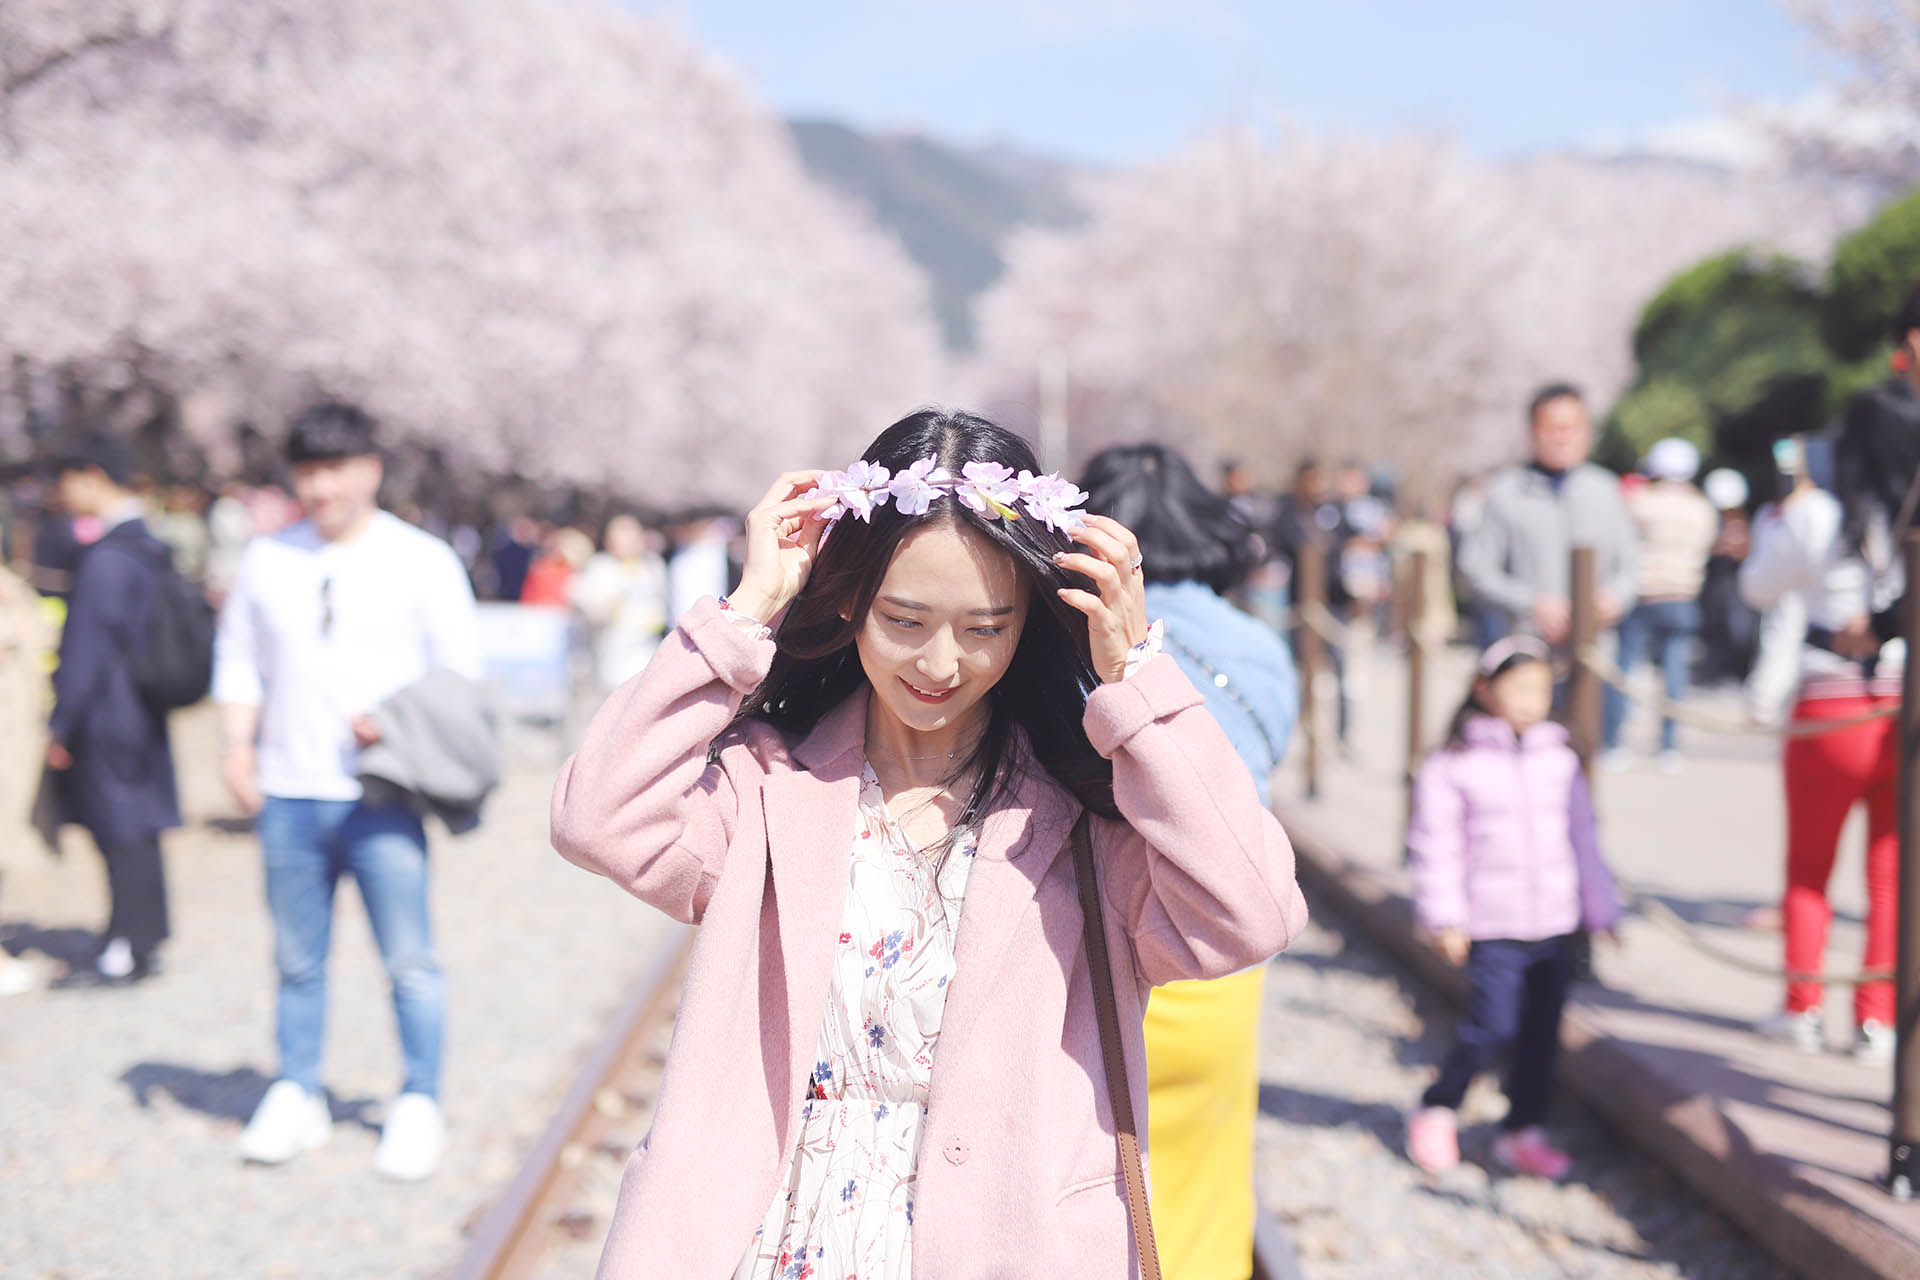 South Korea 2020 Cherry Blossoms are expected to bloom 3 to 9 days earlier